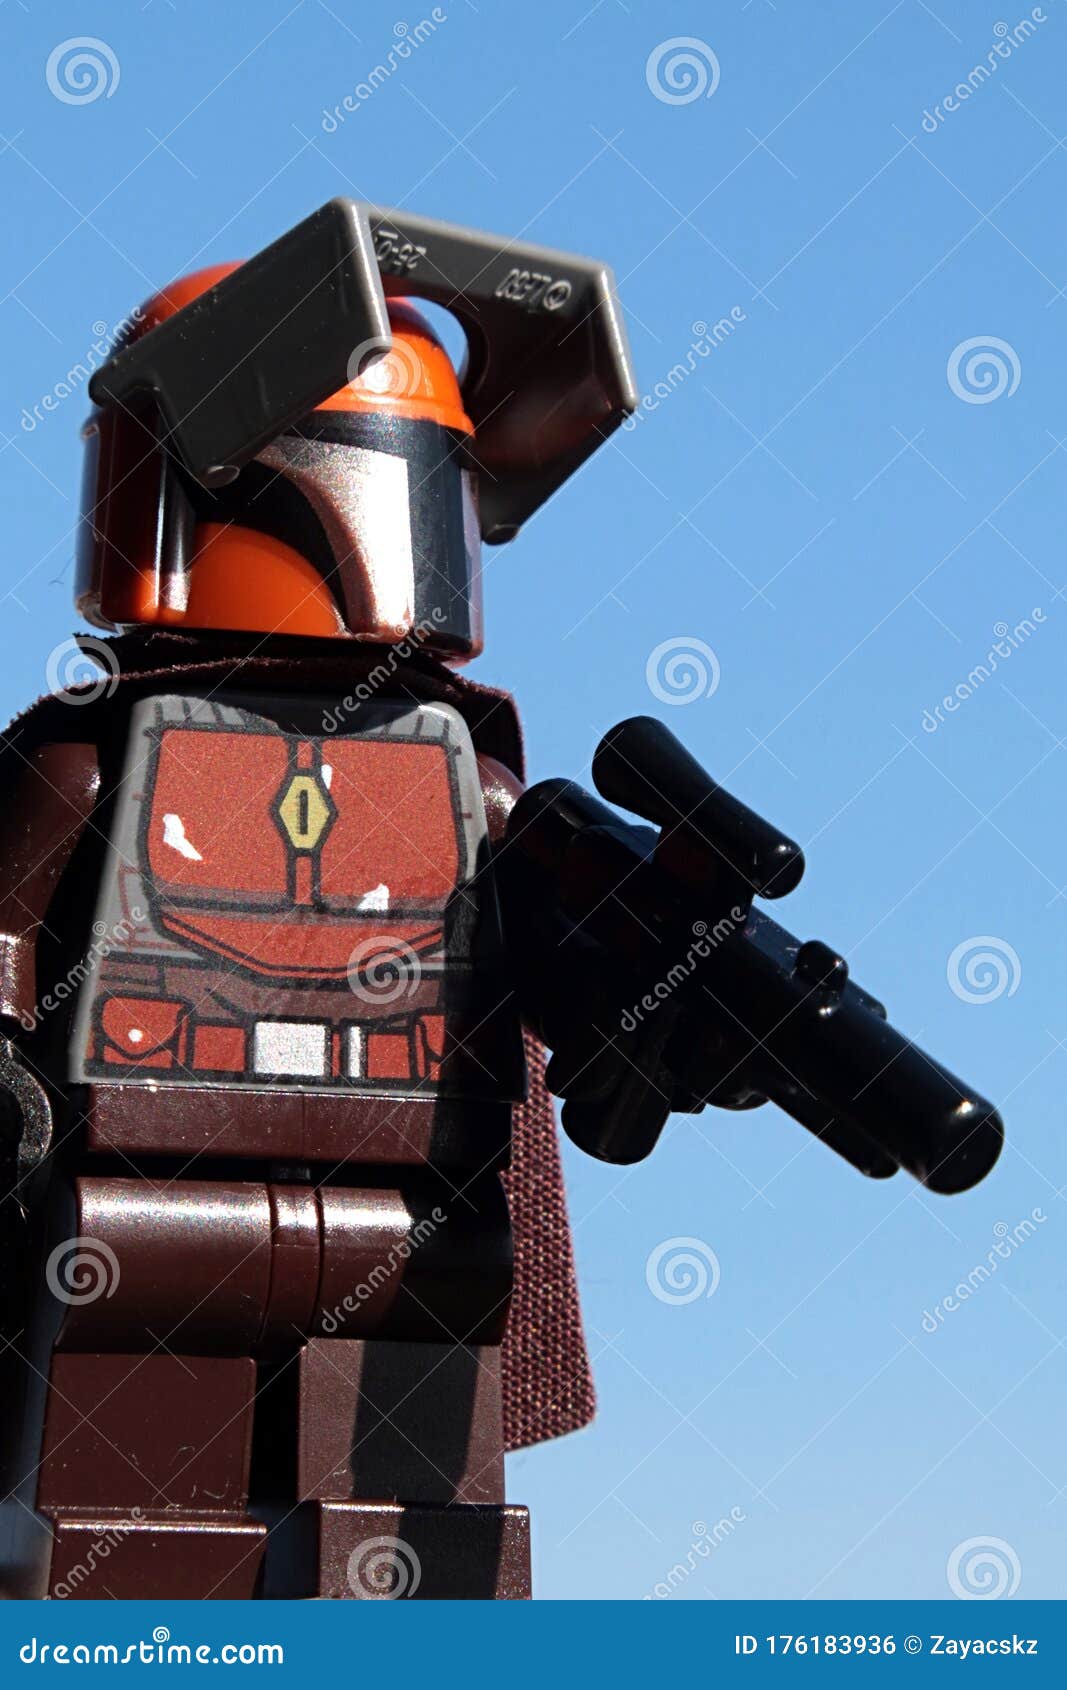 SW1079 1 LEGO Minifigure MANDALORIAN Brown with Stud Shooter/Accessories